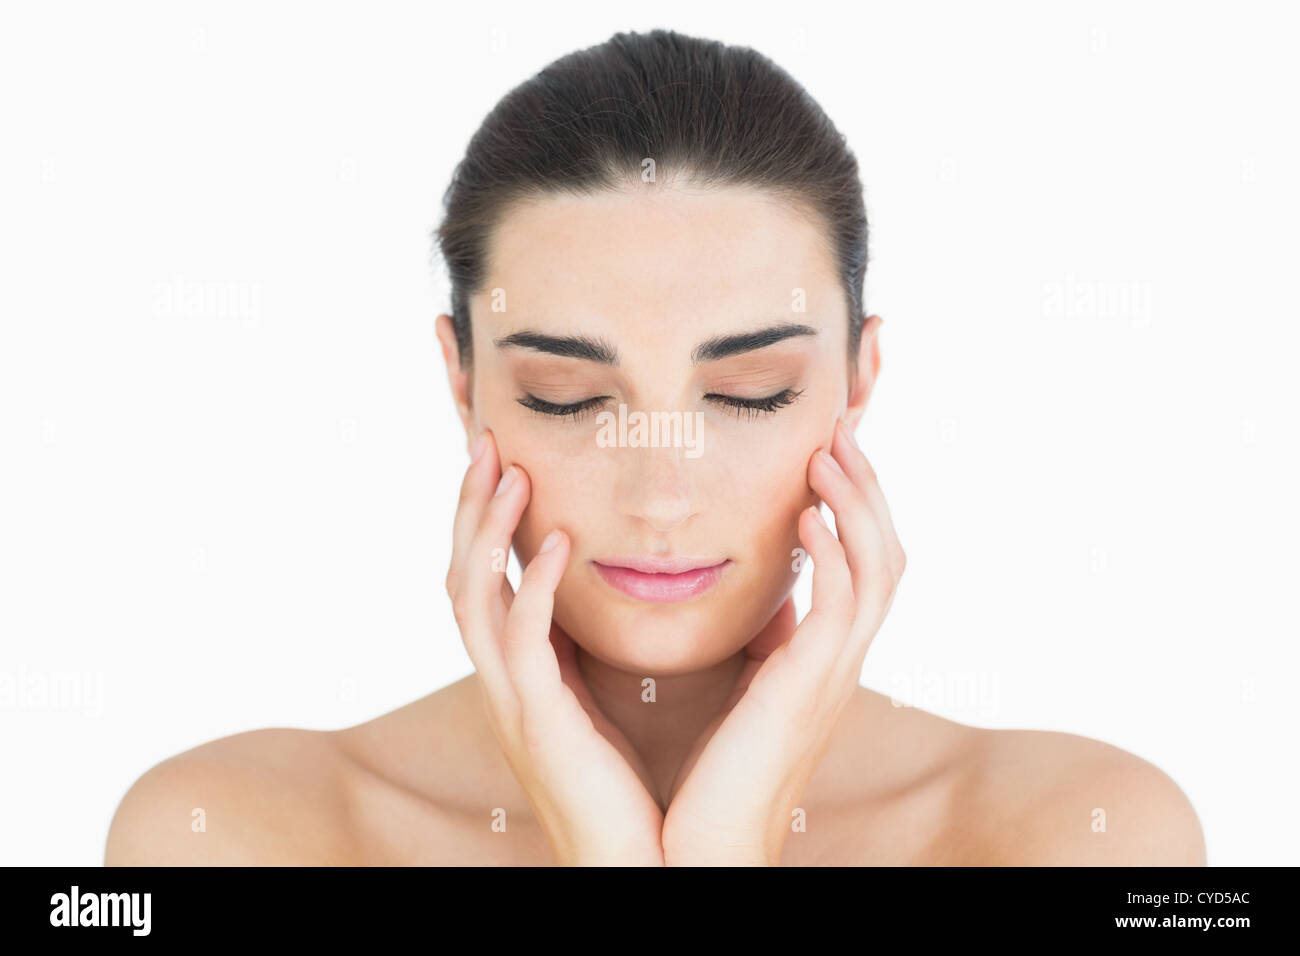 Woman touching her chin while looking natural Stock Photo